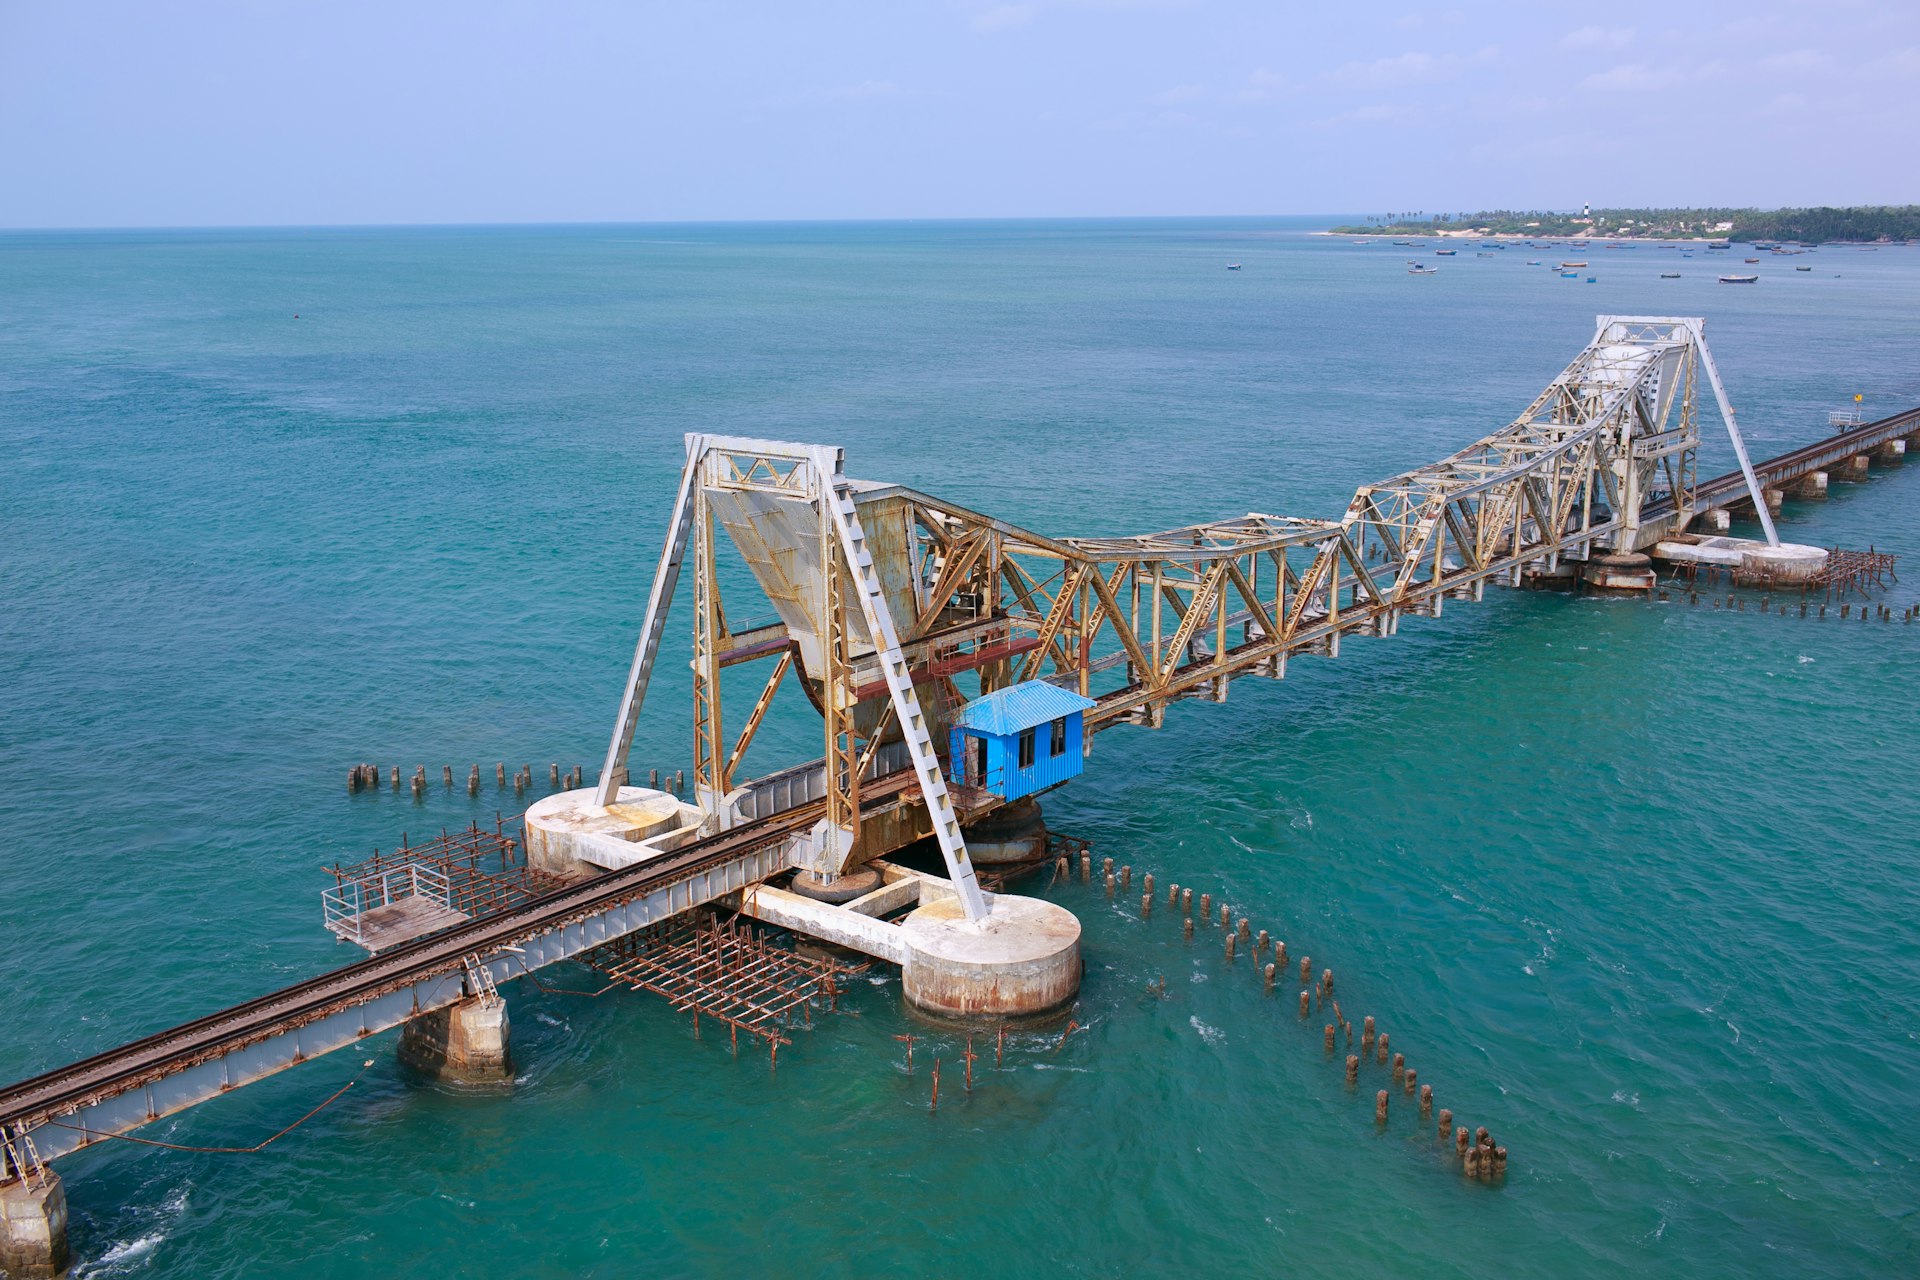 A white steel bridge tinged with rust diagonally spans this shot of the ocean between Pamban Island and mainland India. A bright blue control cabin sits on one side of the cantilevered Pamban Bridge, while an arc of wood buoys curves towards the viewer. In the background, small ships anchored offshore can be seen by the horizon 